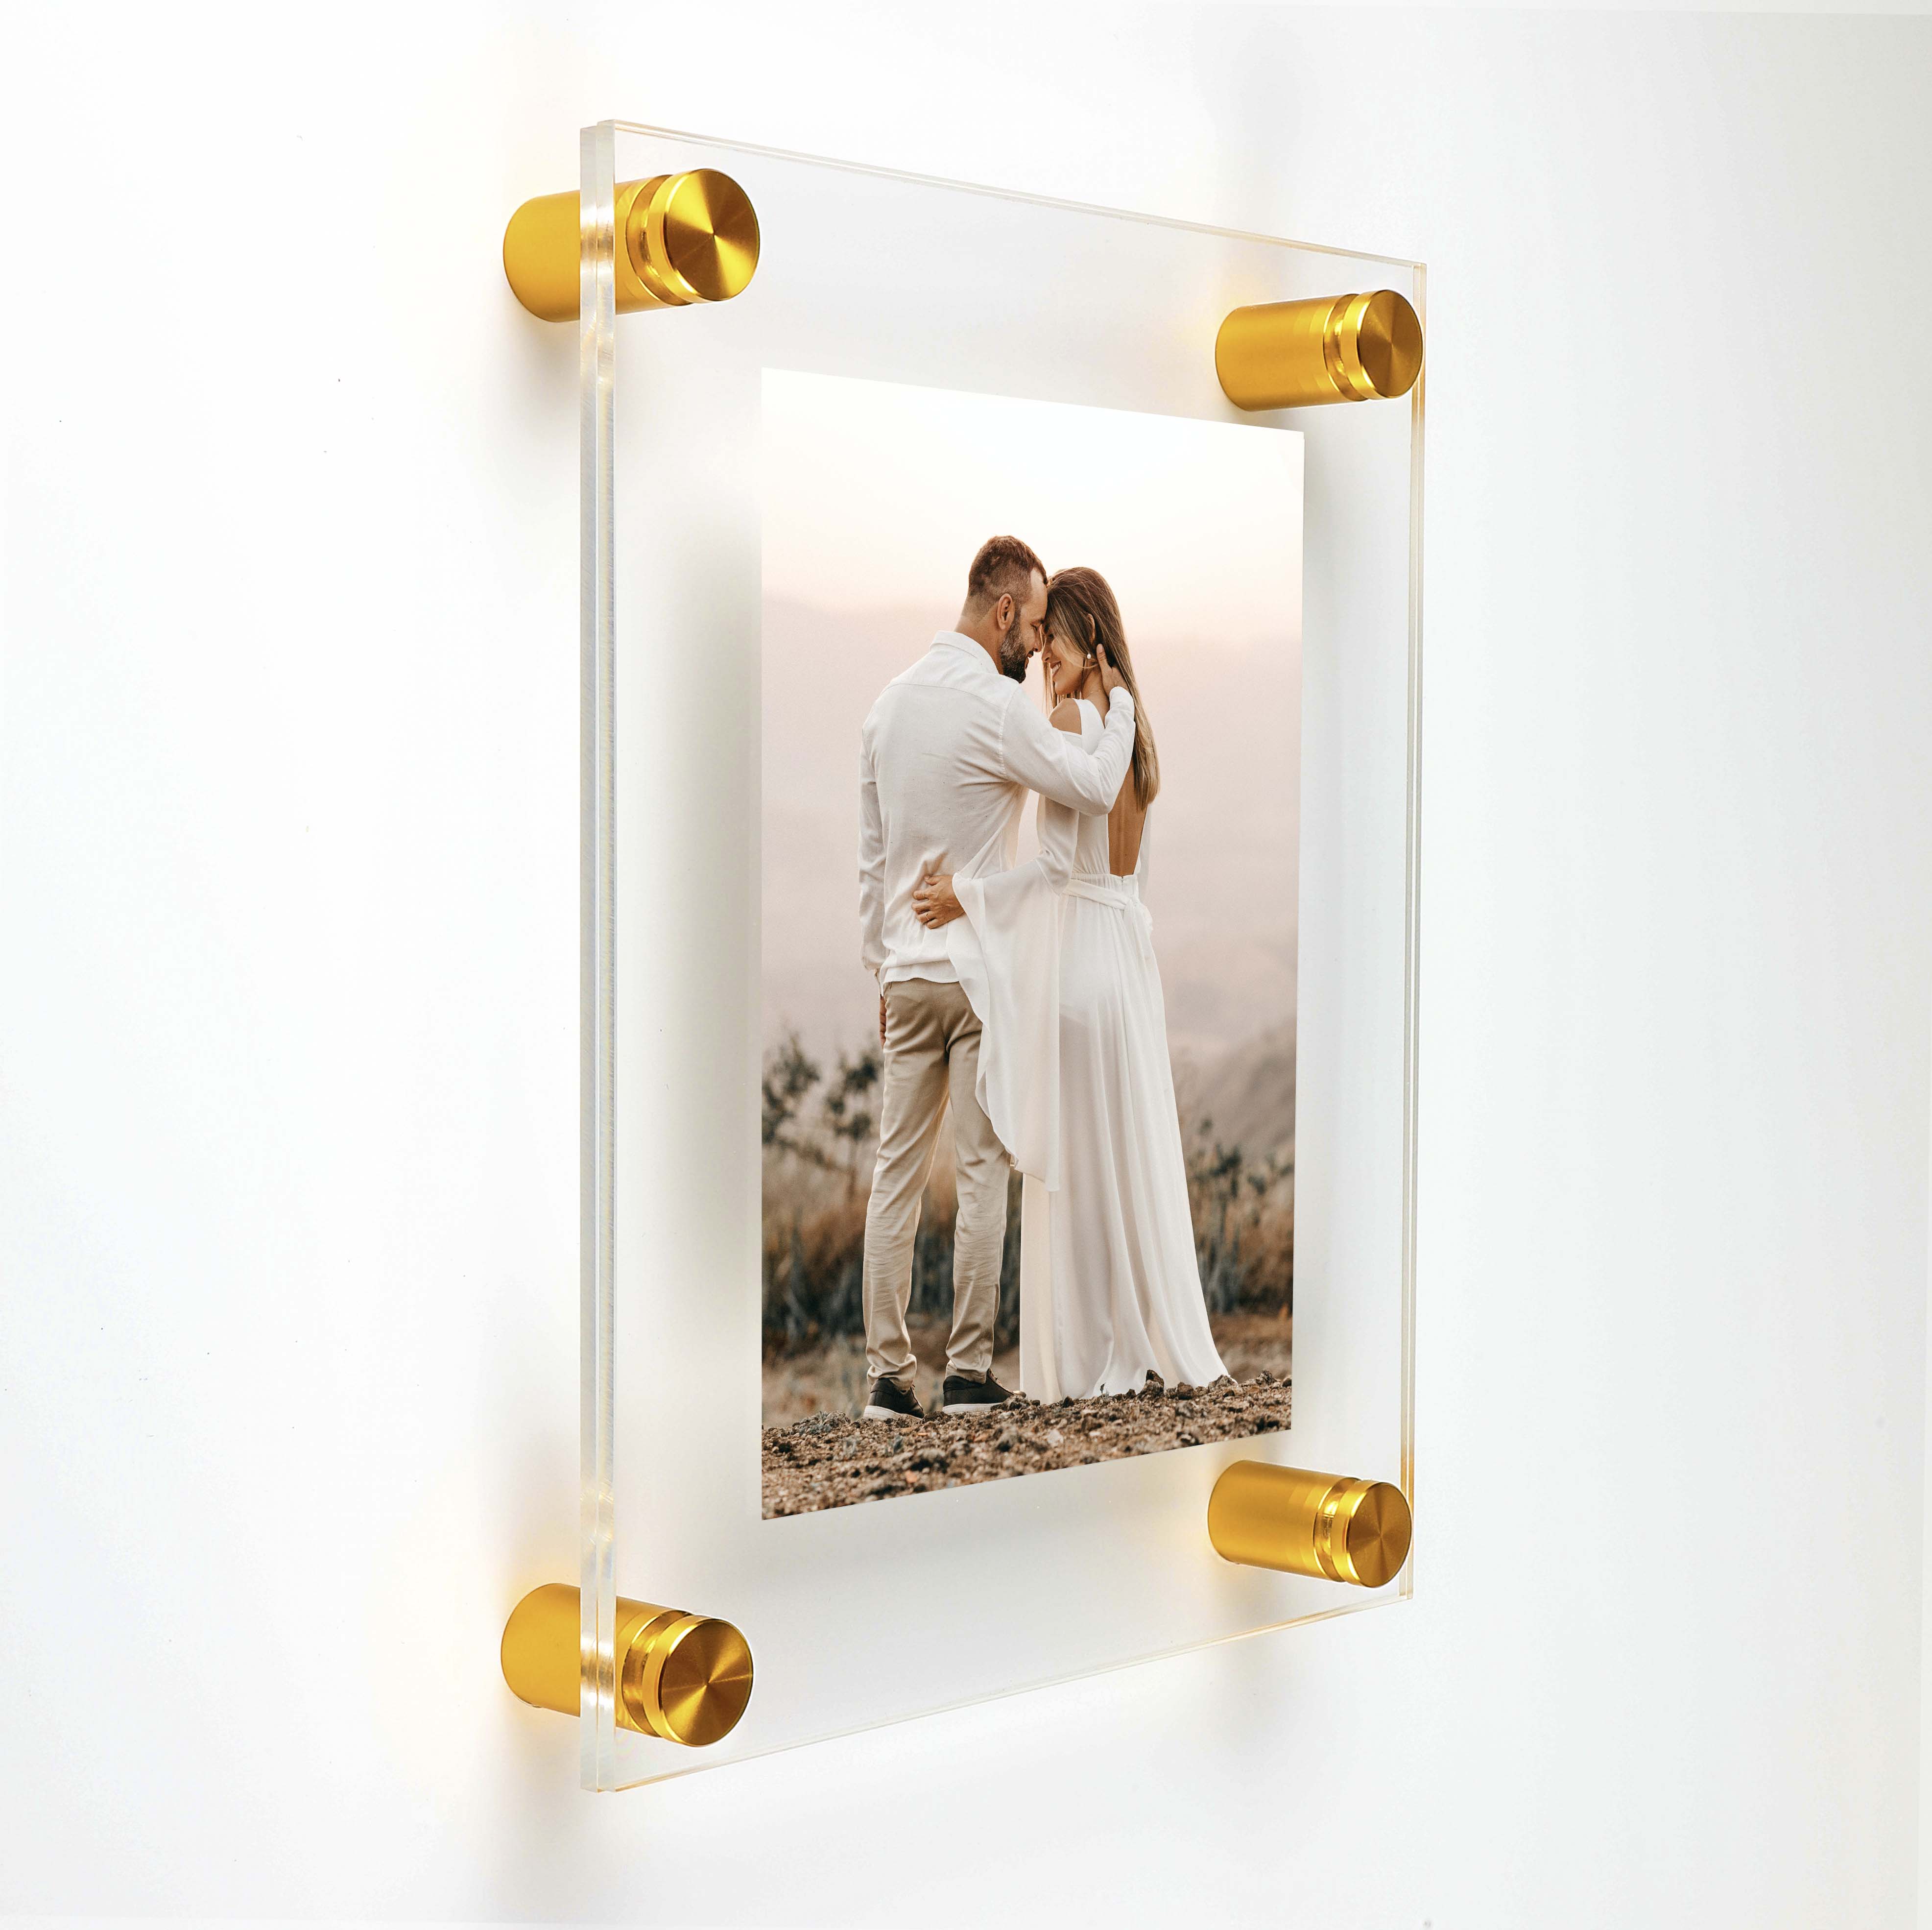 (2) 11'' x 13-1/2'' Clear Acrylics , Pre-Drilled With Polished Edges (Thick 1/8'' each), Wall Frame with (4) 5/8'' x 1'' Gold Anodized Aluminum Standoffs includes Screws and Anchors